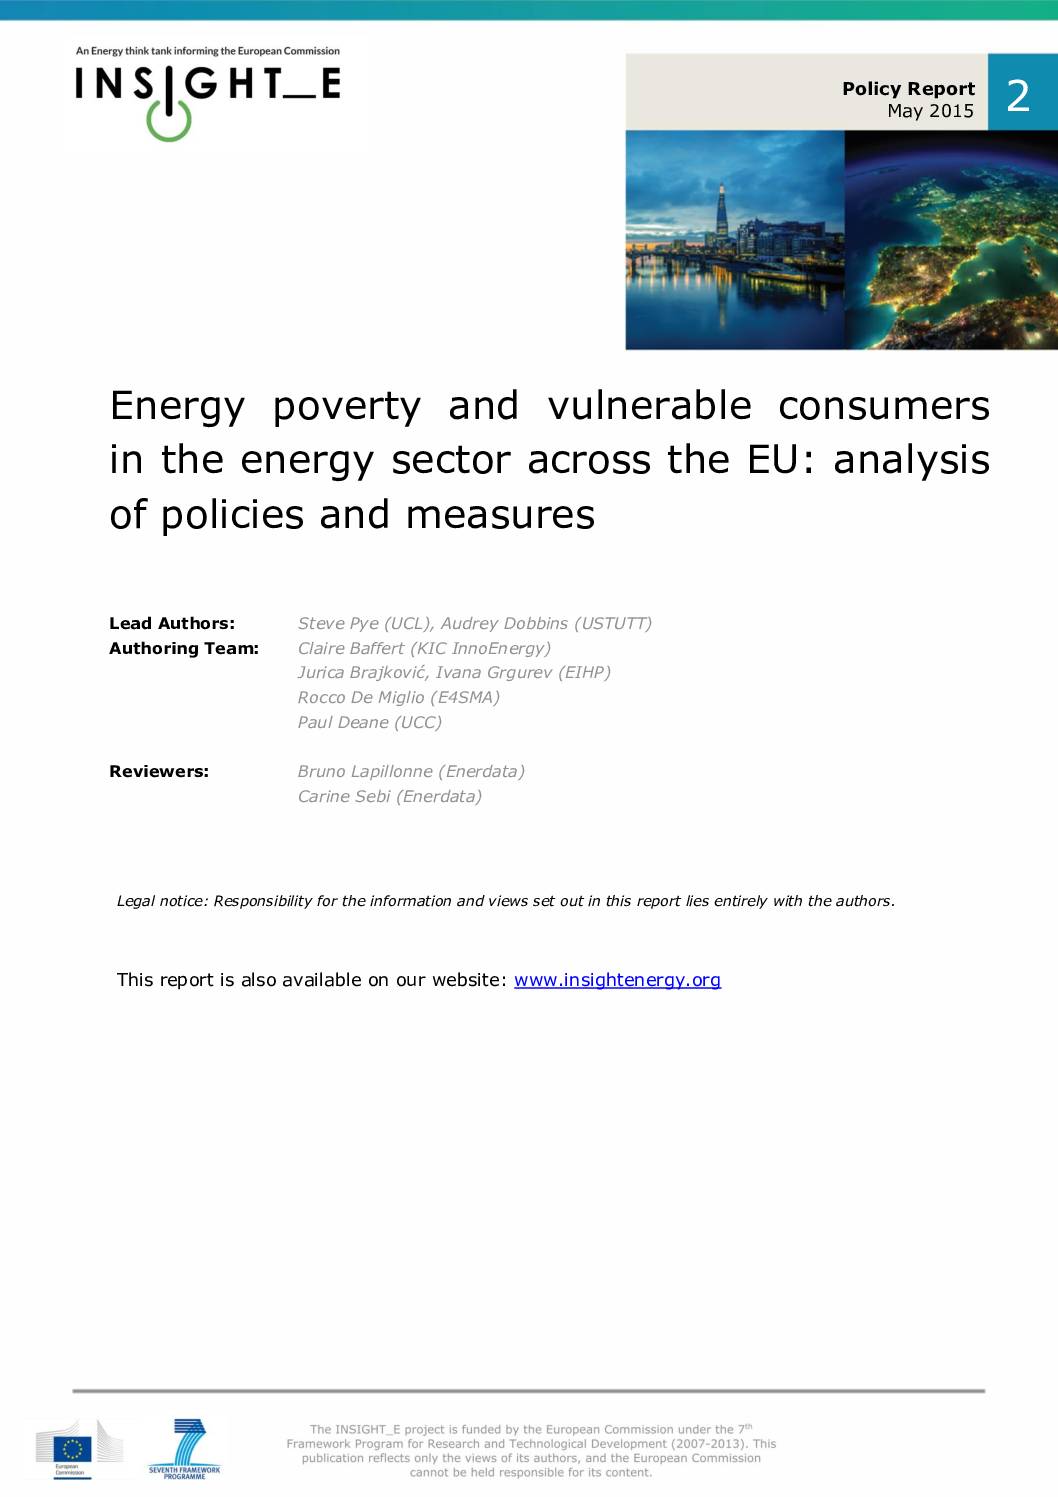 Energy poverty and vulnerable consumers in the energy sector across the EU: analysis of policies and measures